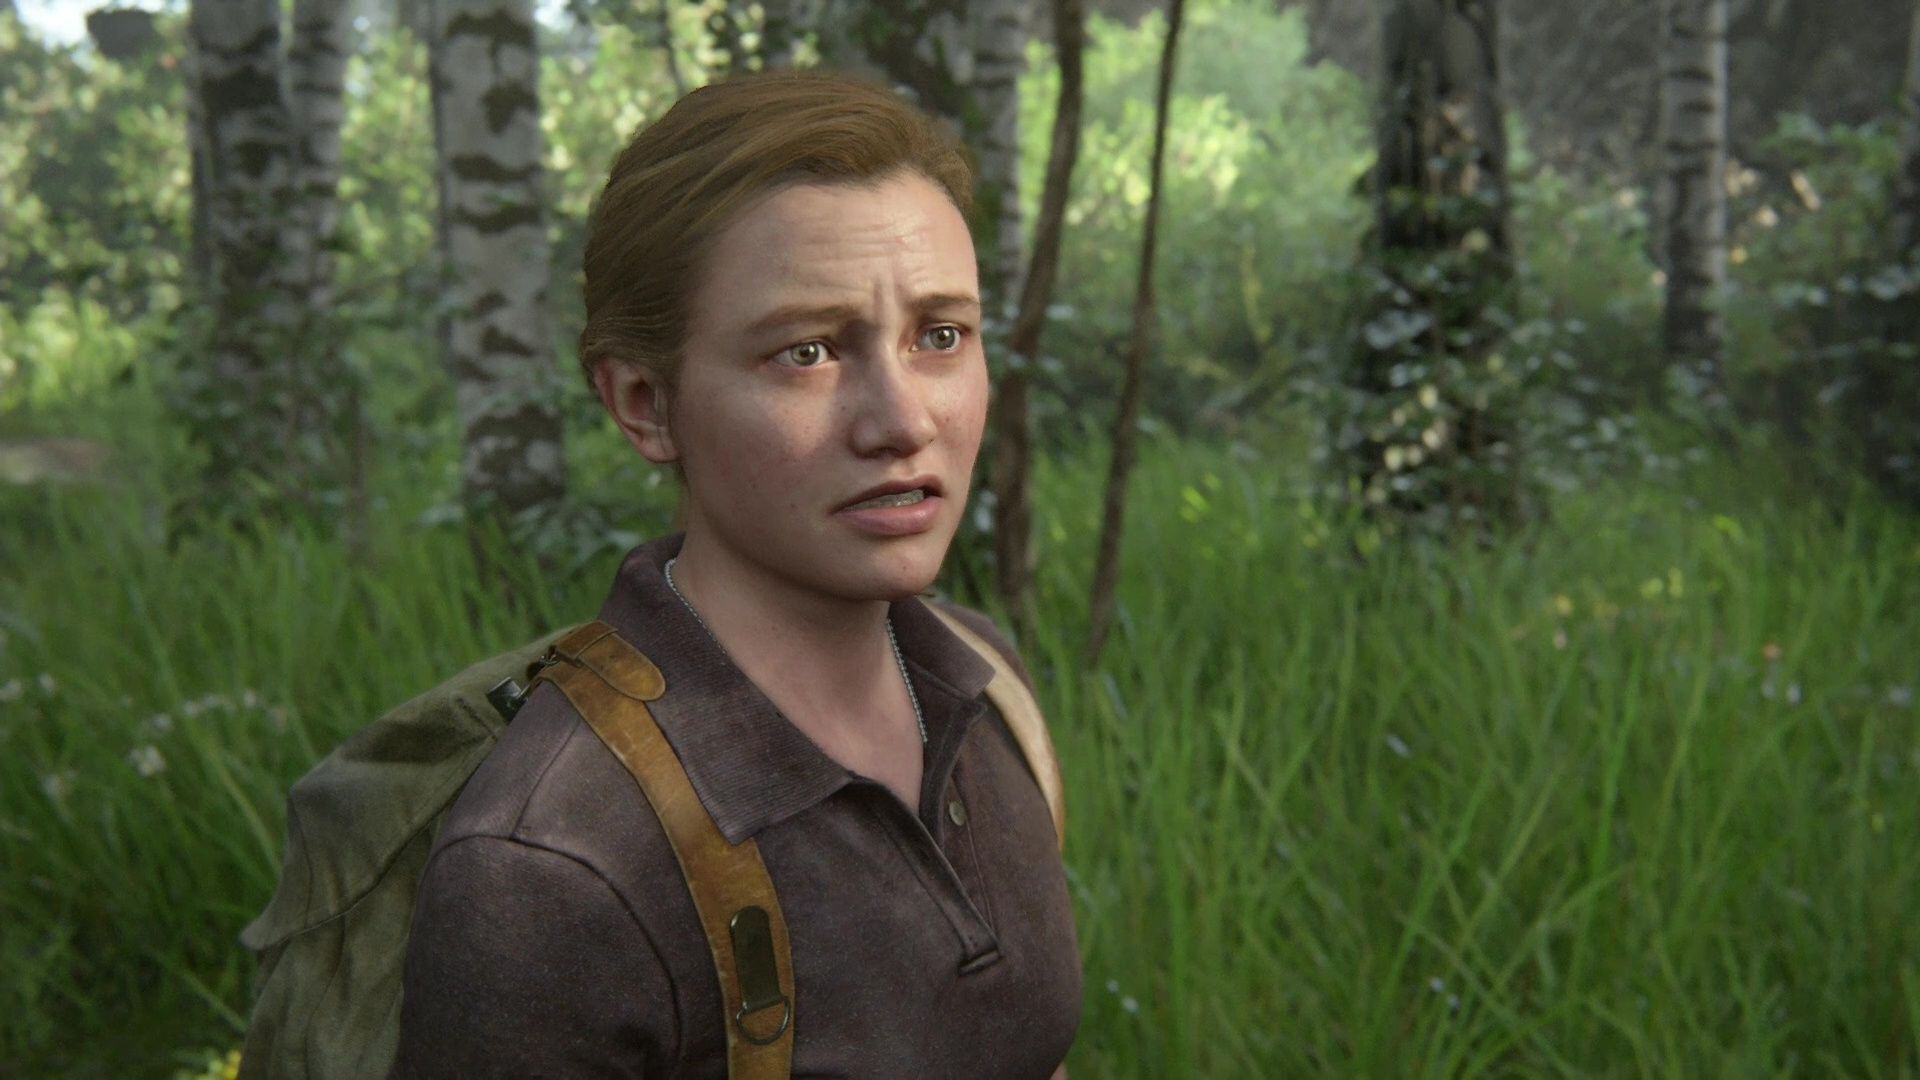 The Last Of Us Season 2s Biggest Challenge Might Be Casting Abby